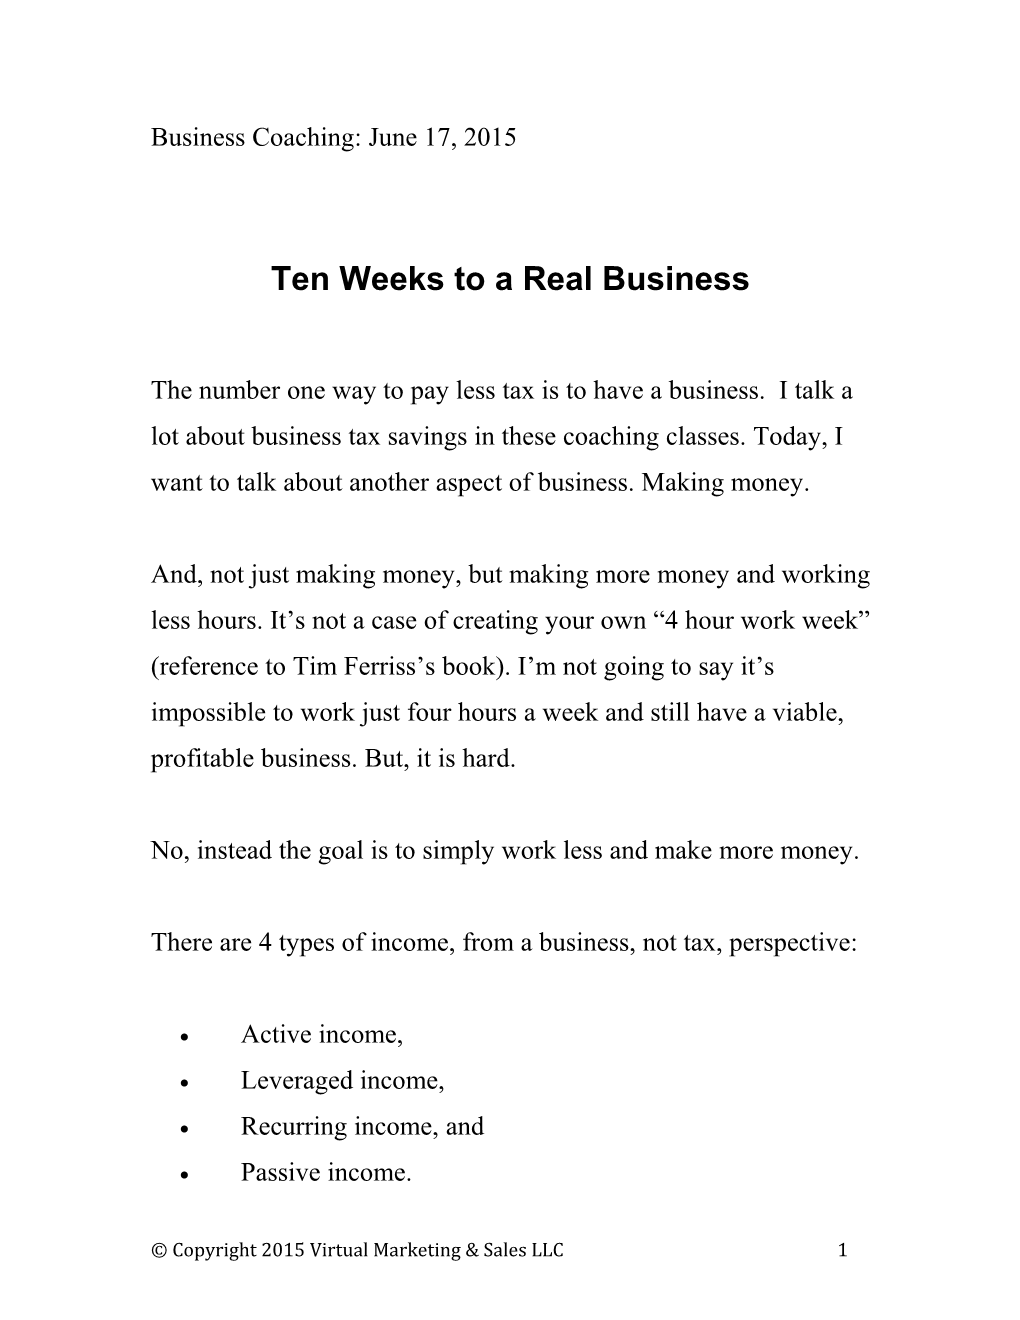 Ten Weeks to a Real Business